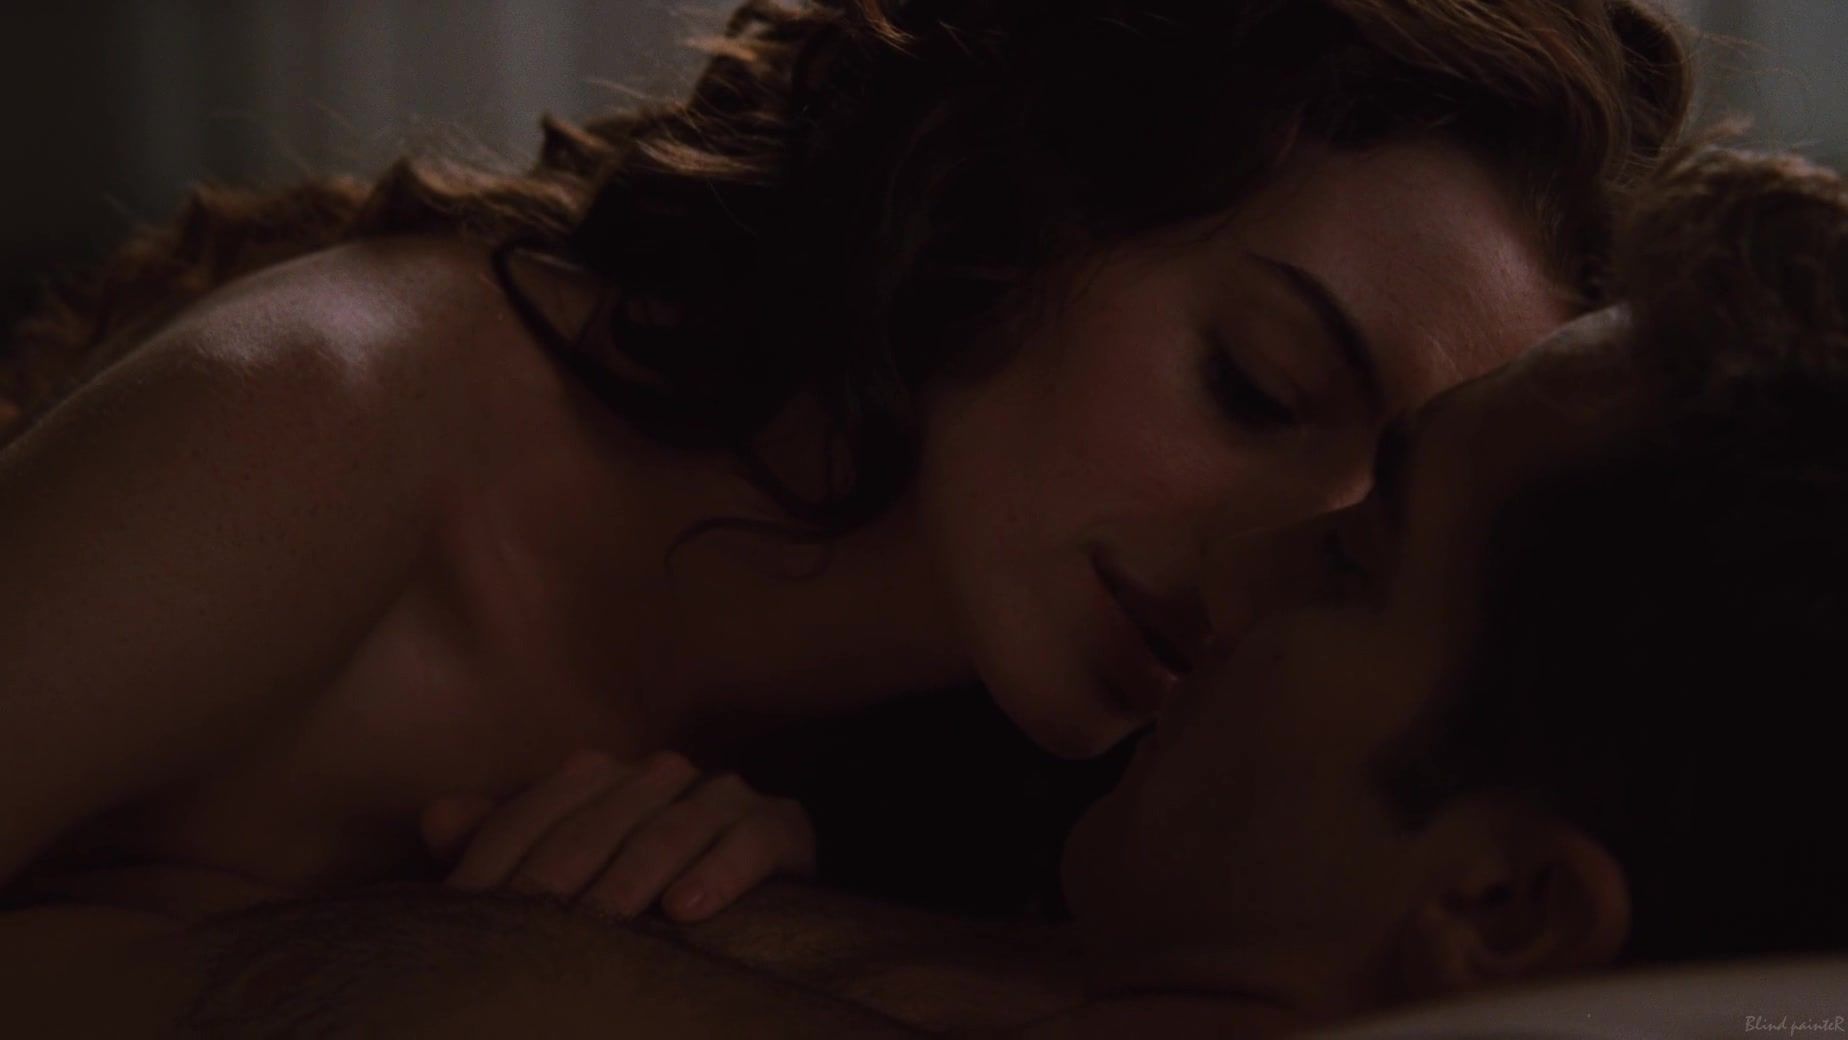 Family Sex Anne Hathaway nude - Love and Other Drugs (2010) Tites - 1